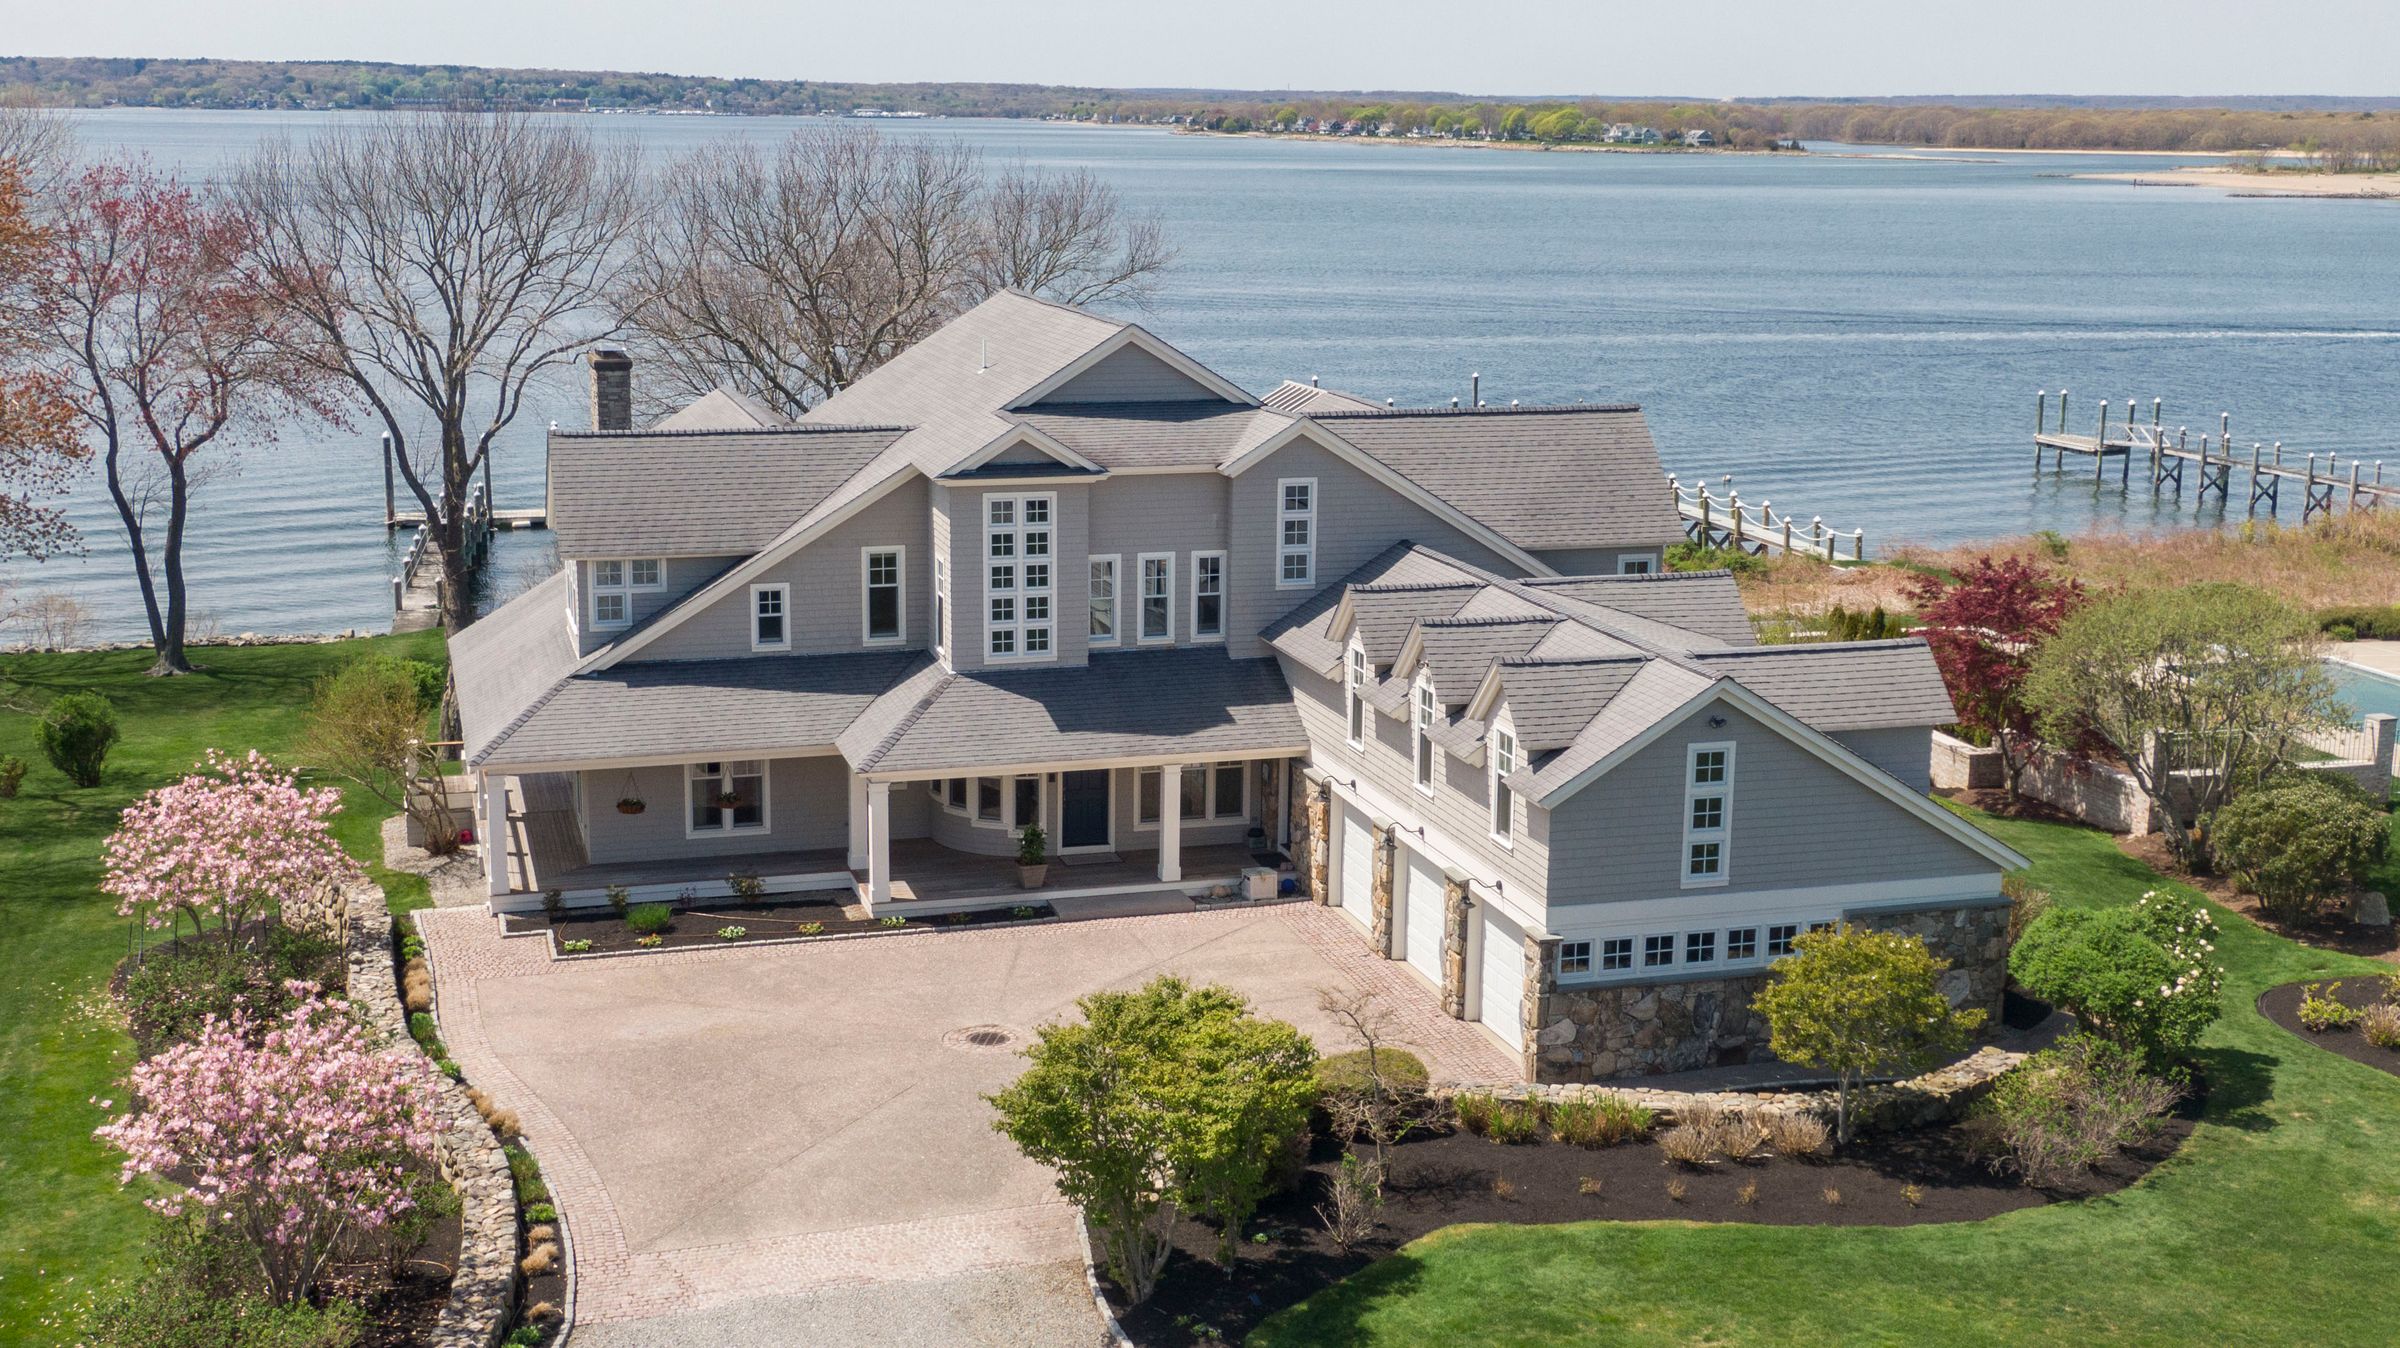 LILA DELMAN COMPASS SETS RECORD FOR HIGHEST HOME SALE IN WARWICK HISTORY*